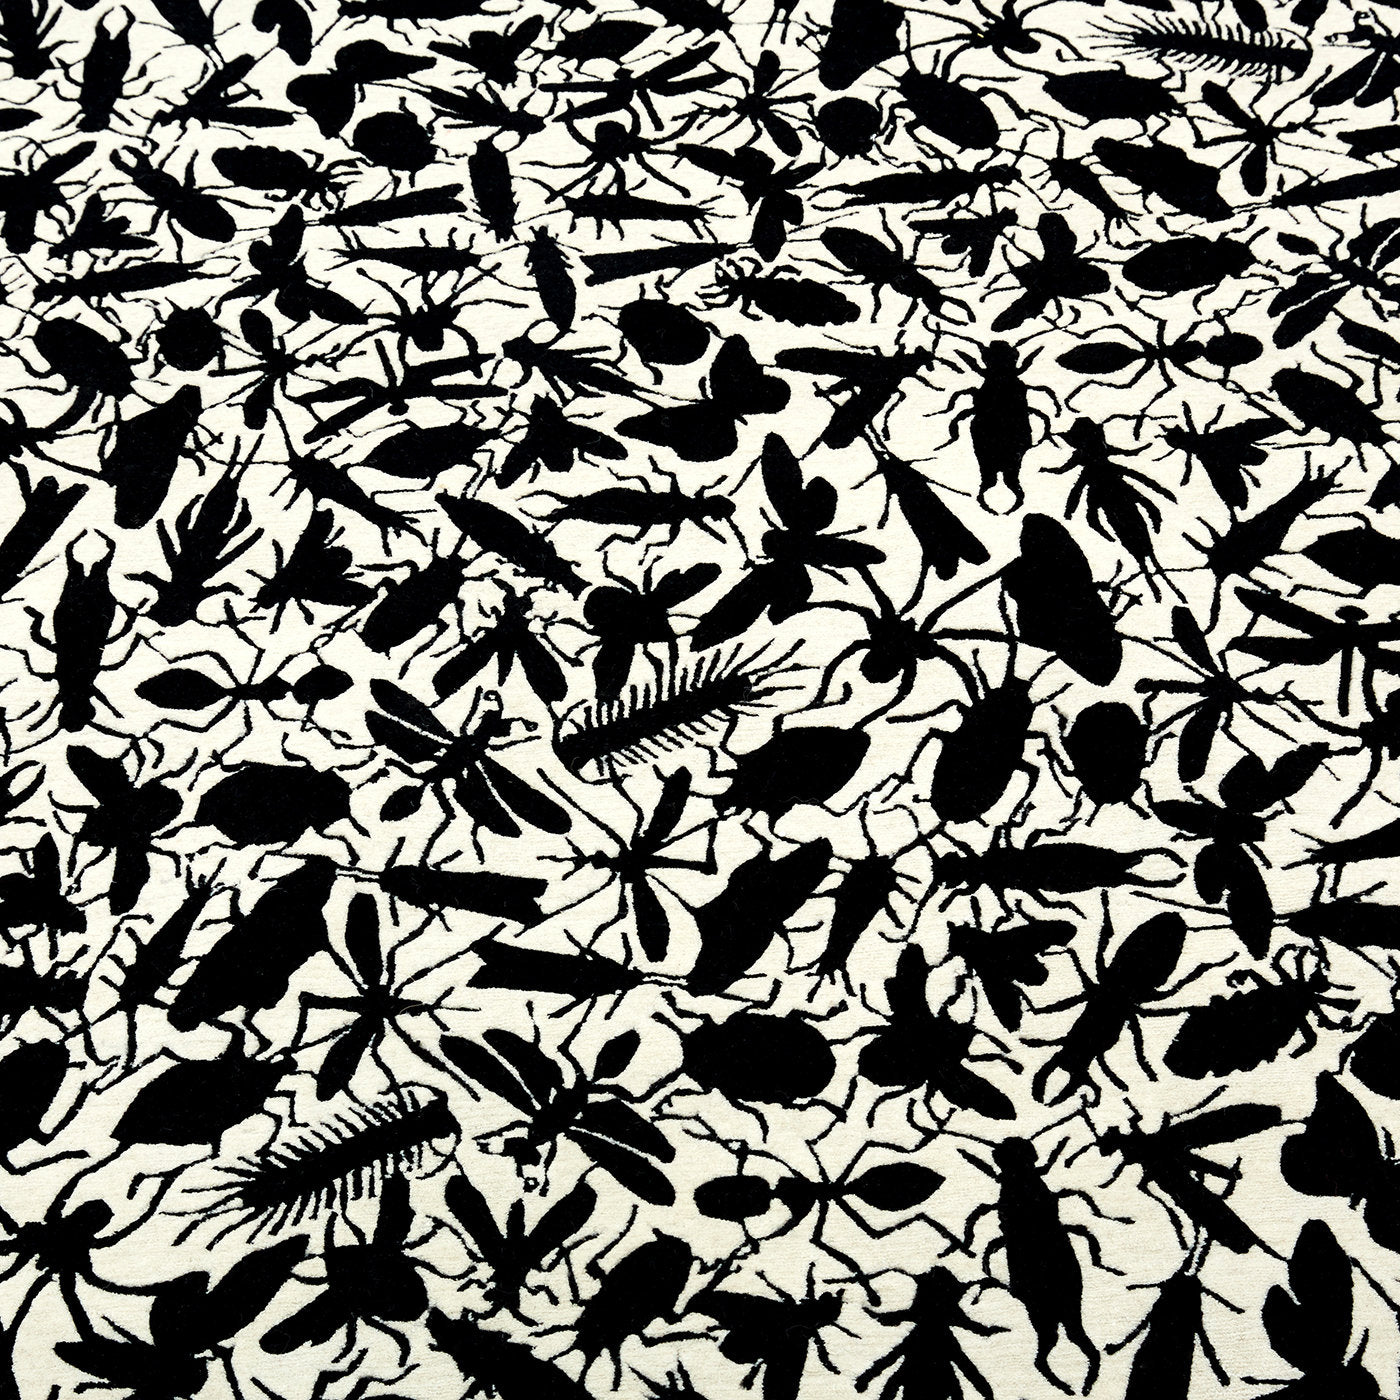 Insects Rug by Studio Job - Alternative view 2